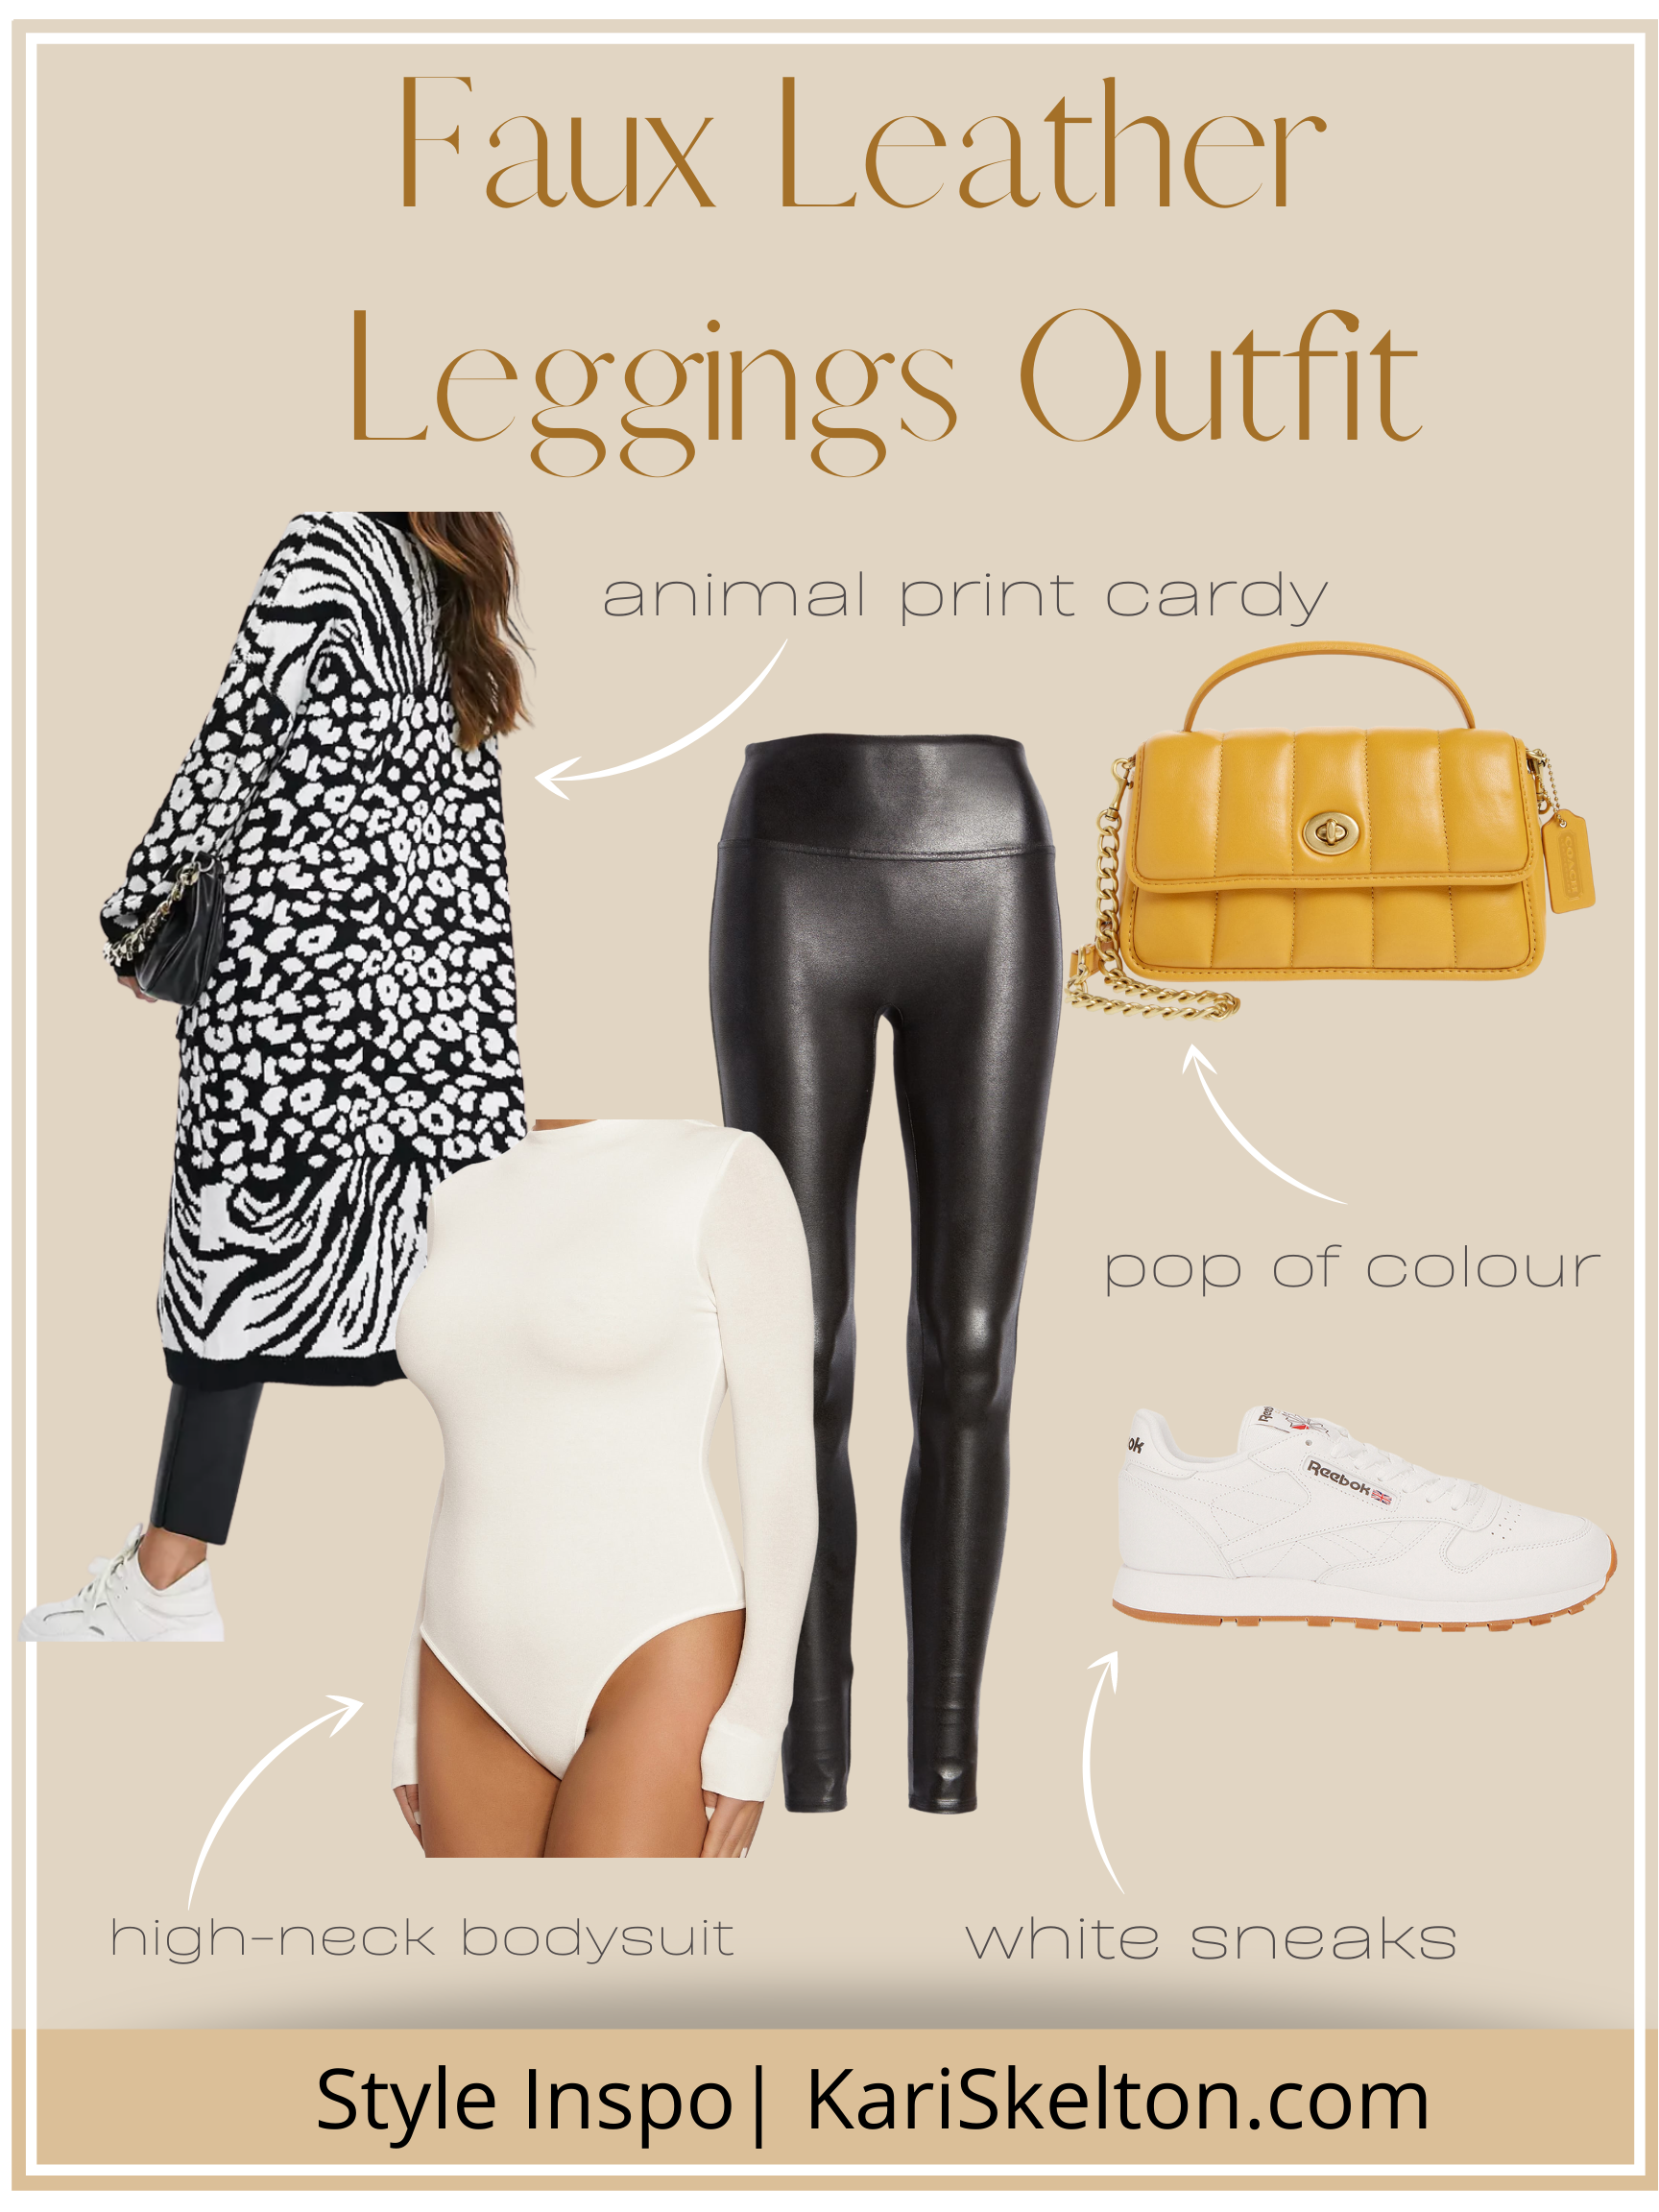 Outfit Ideas for Faux Leather Leggings - Pinteresting Plans  Outfits with  leggings, Faux leather leggings, Leather leggings